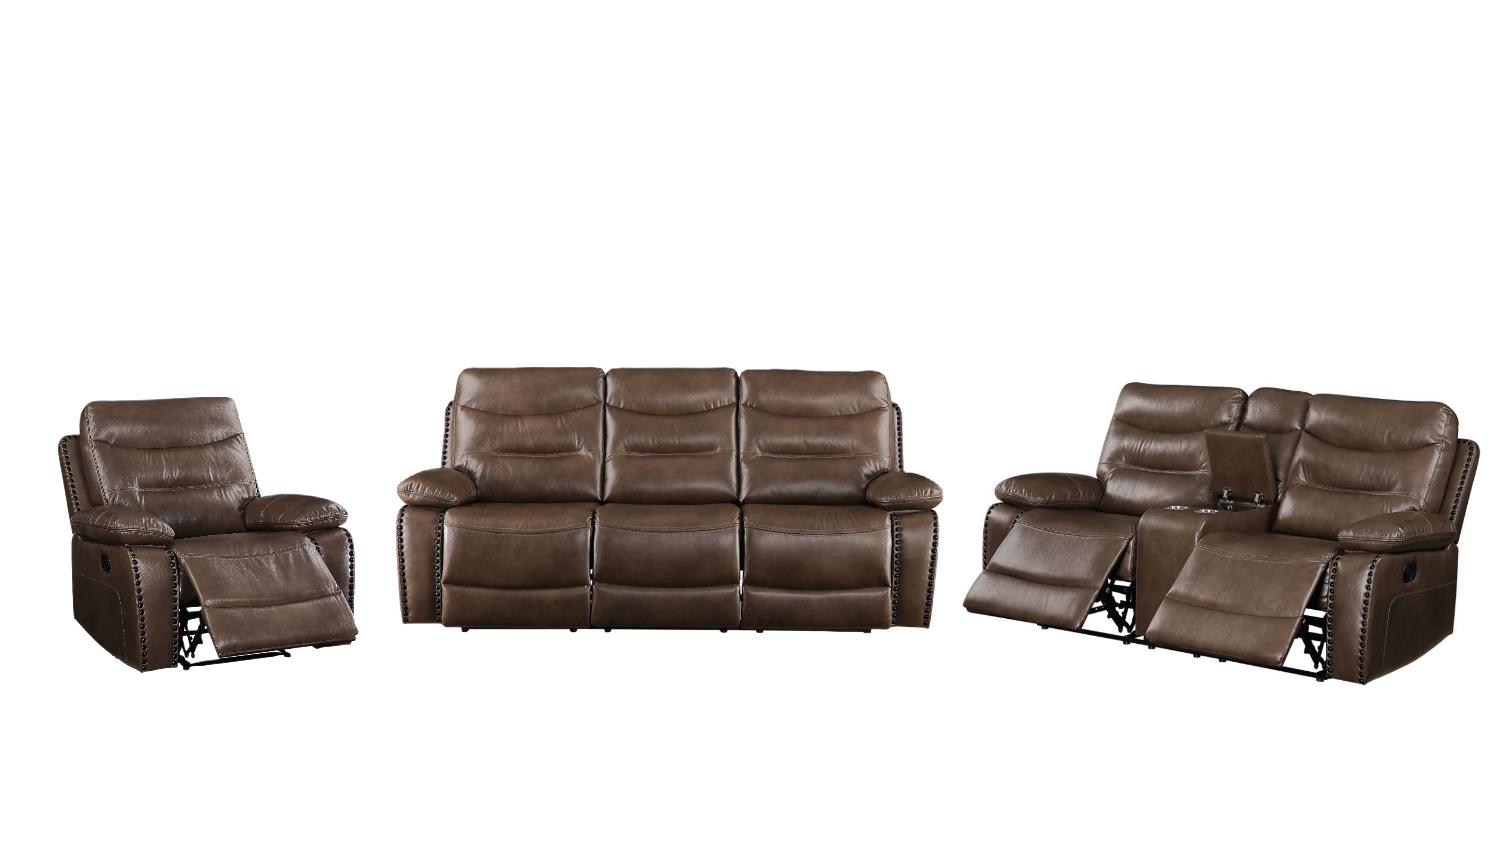 Contemporary Sofa Loveseat and Chair Set Aashi 55420-3pcs in Brown 